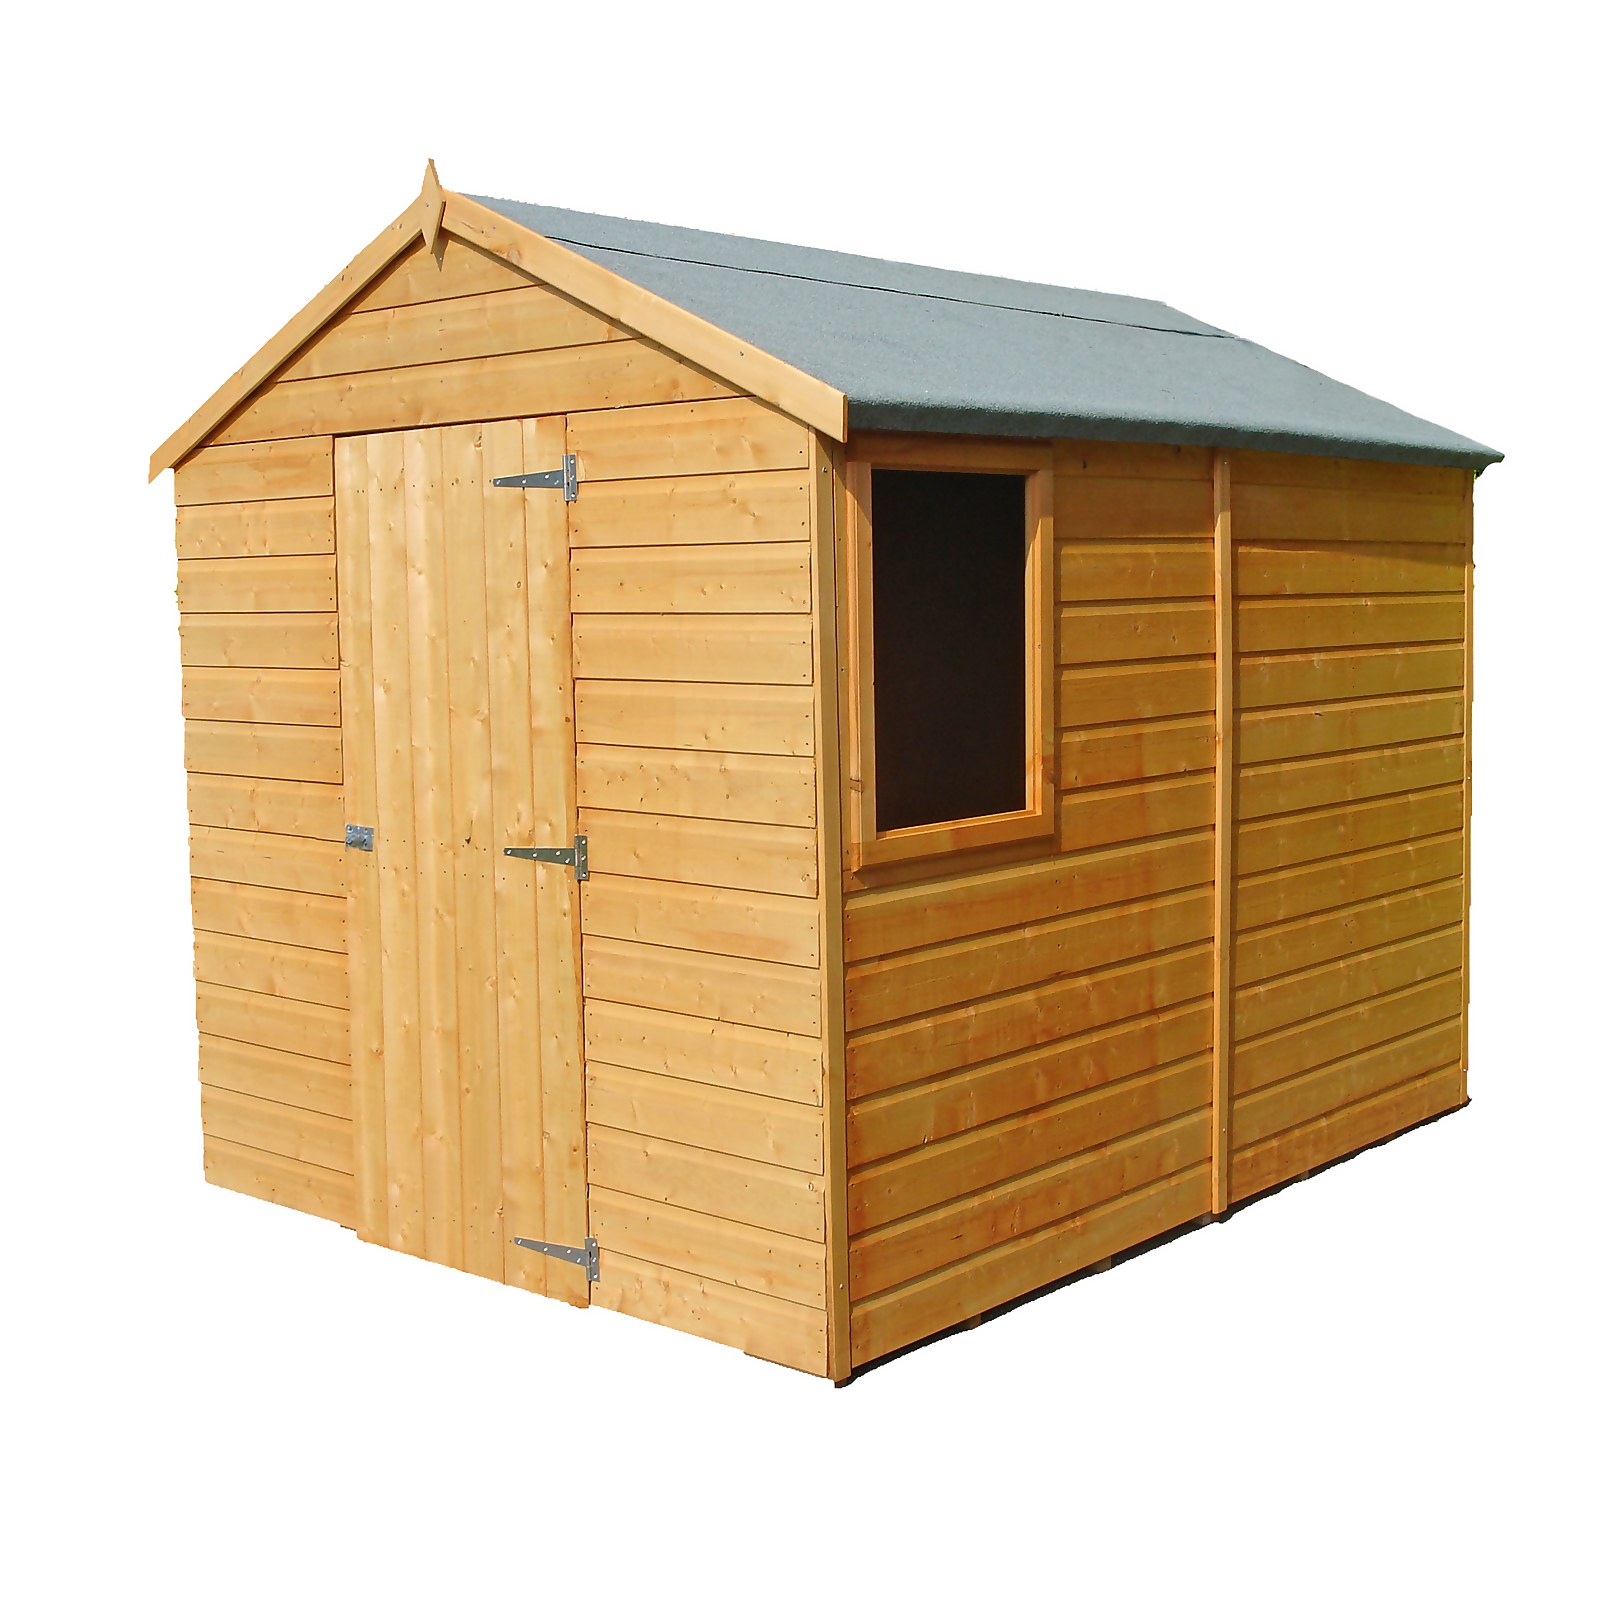 Shire 8x6ft Durham Garden Shed - Including Installation